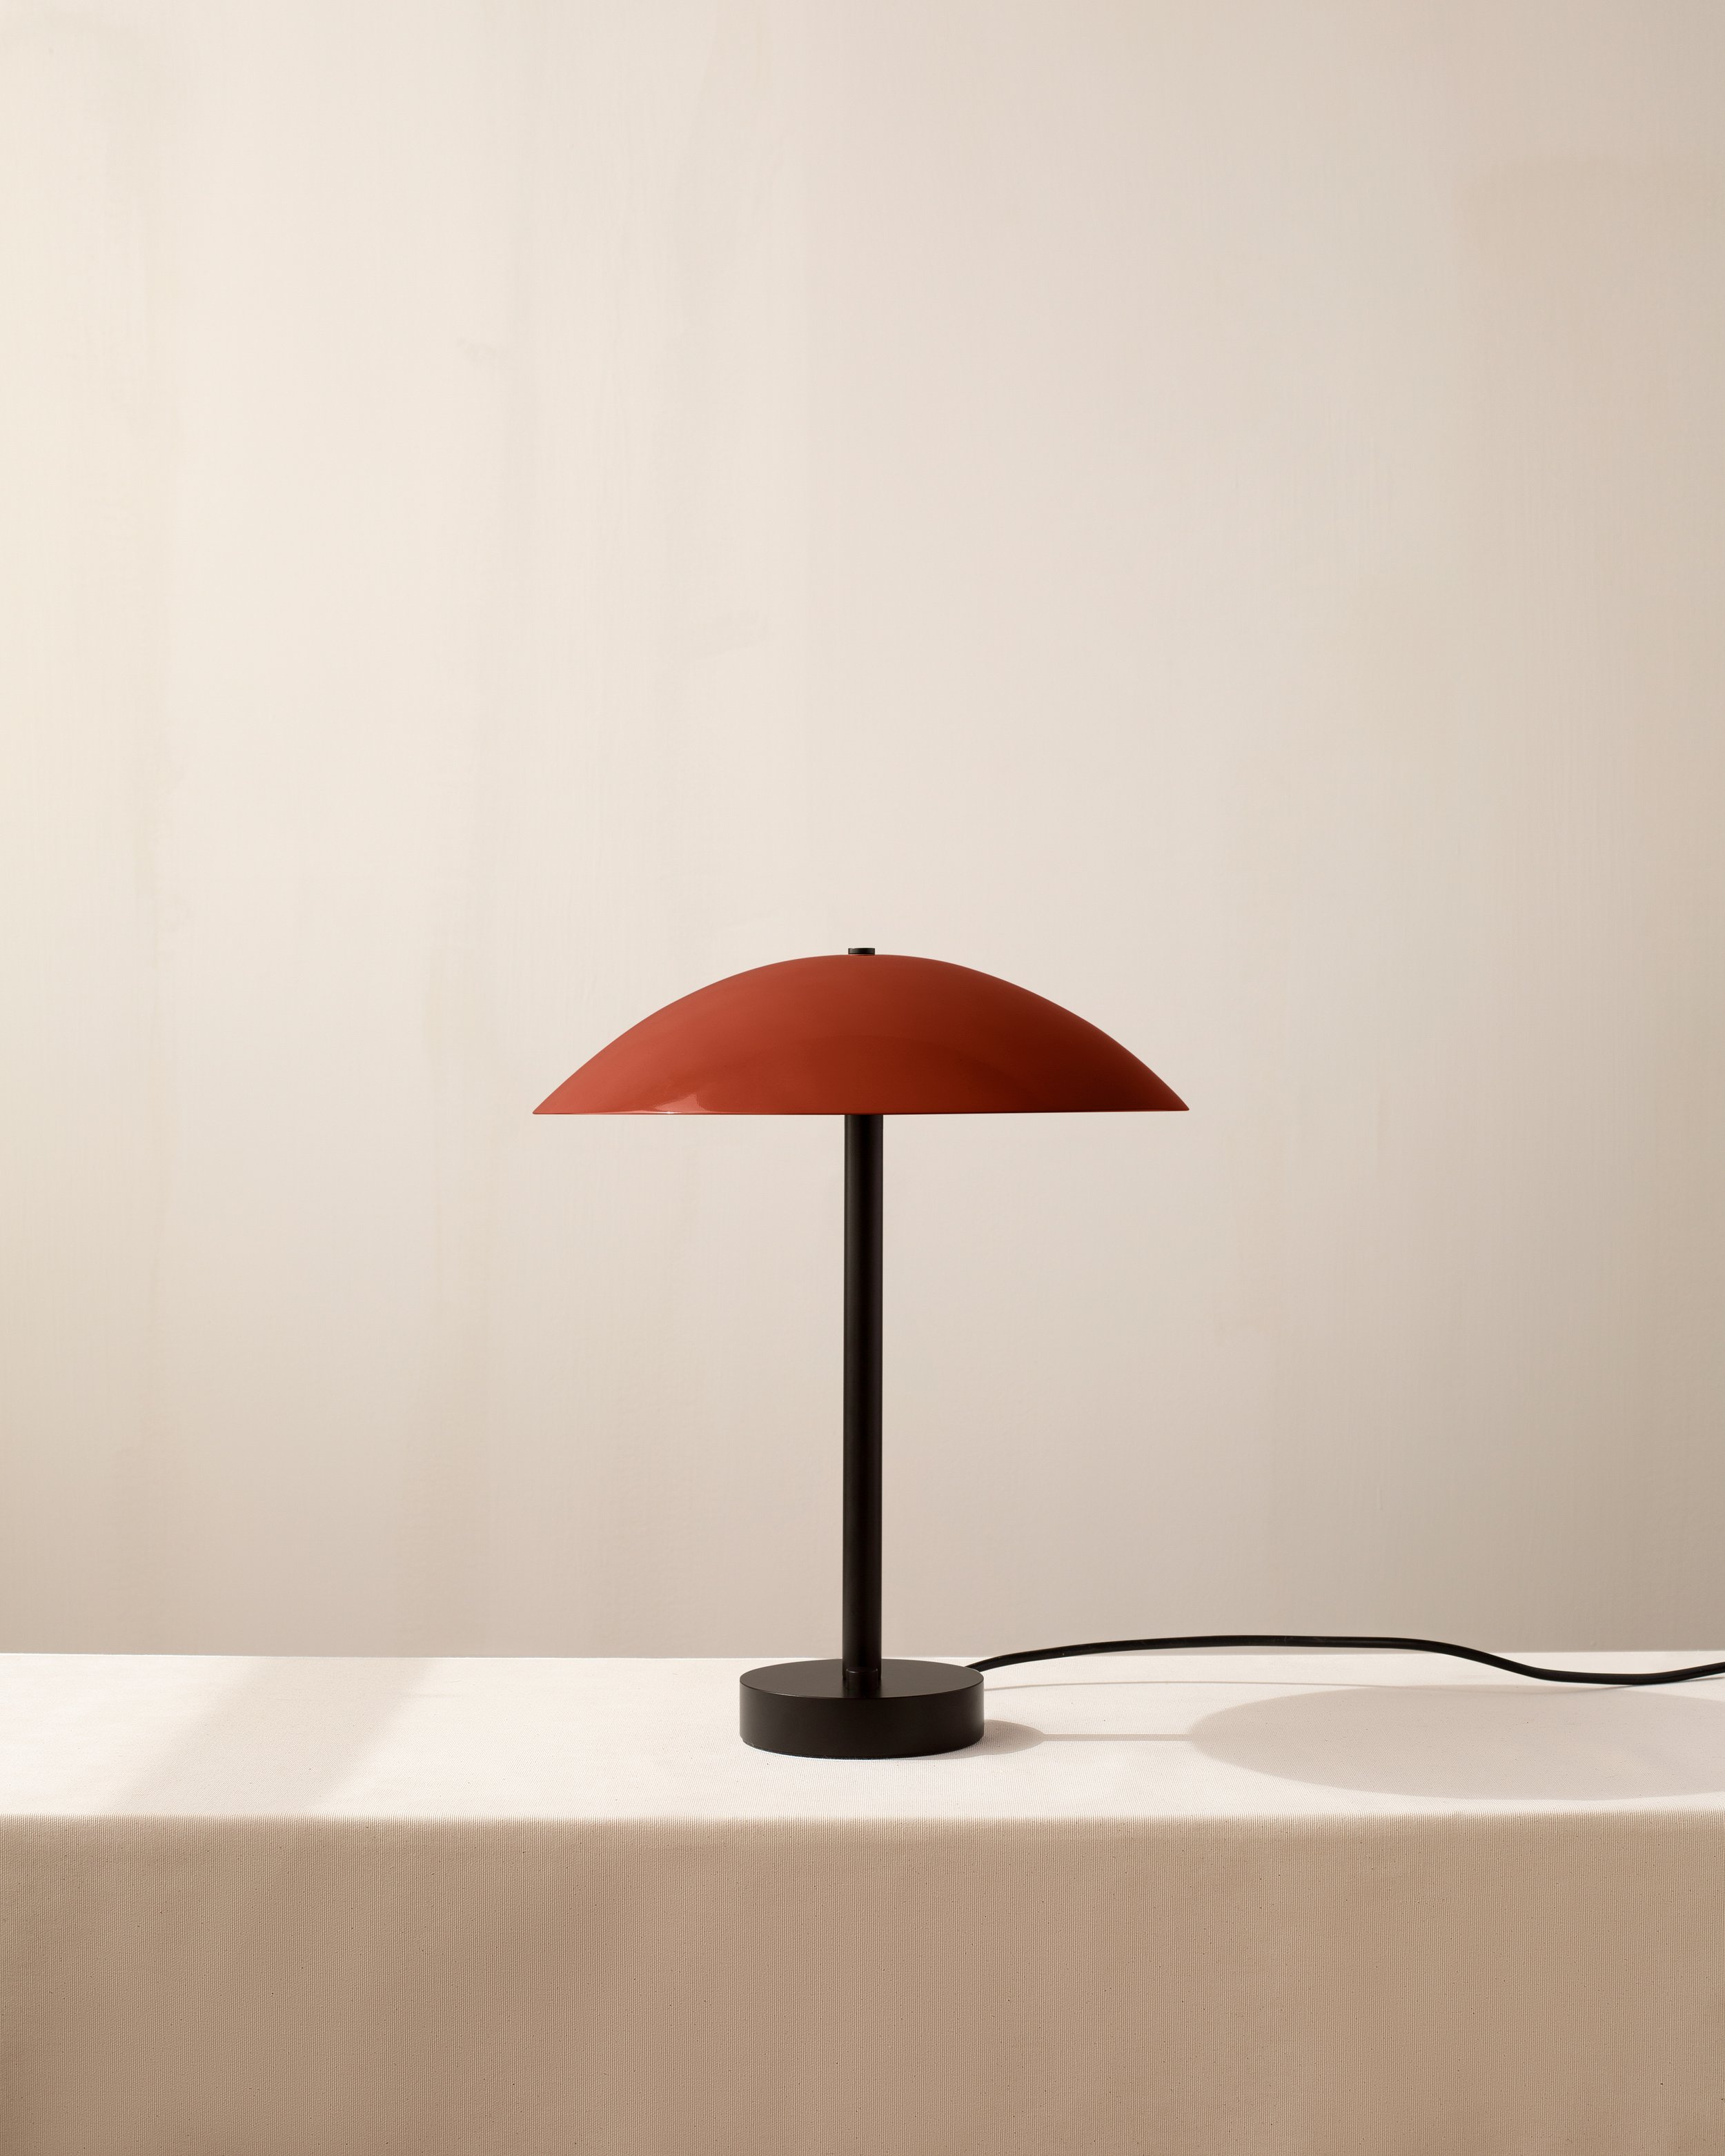 The Arundel Table Lamp